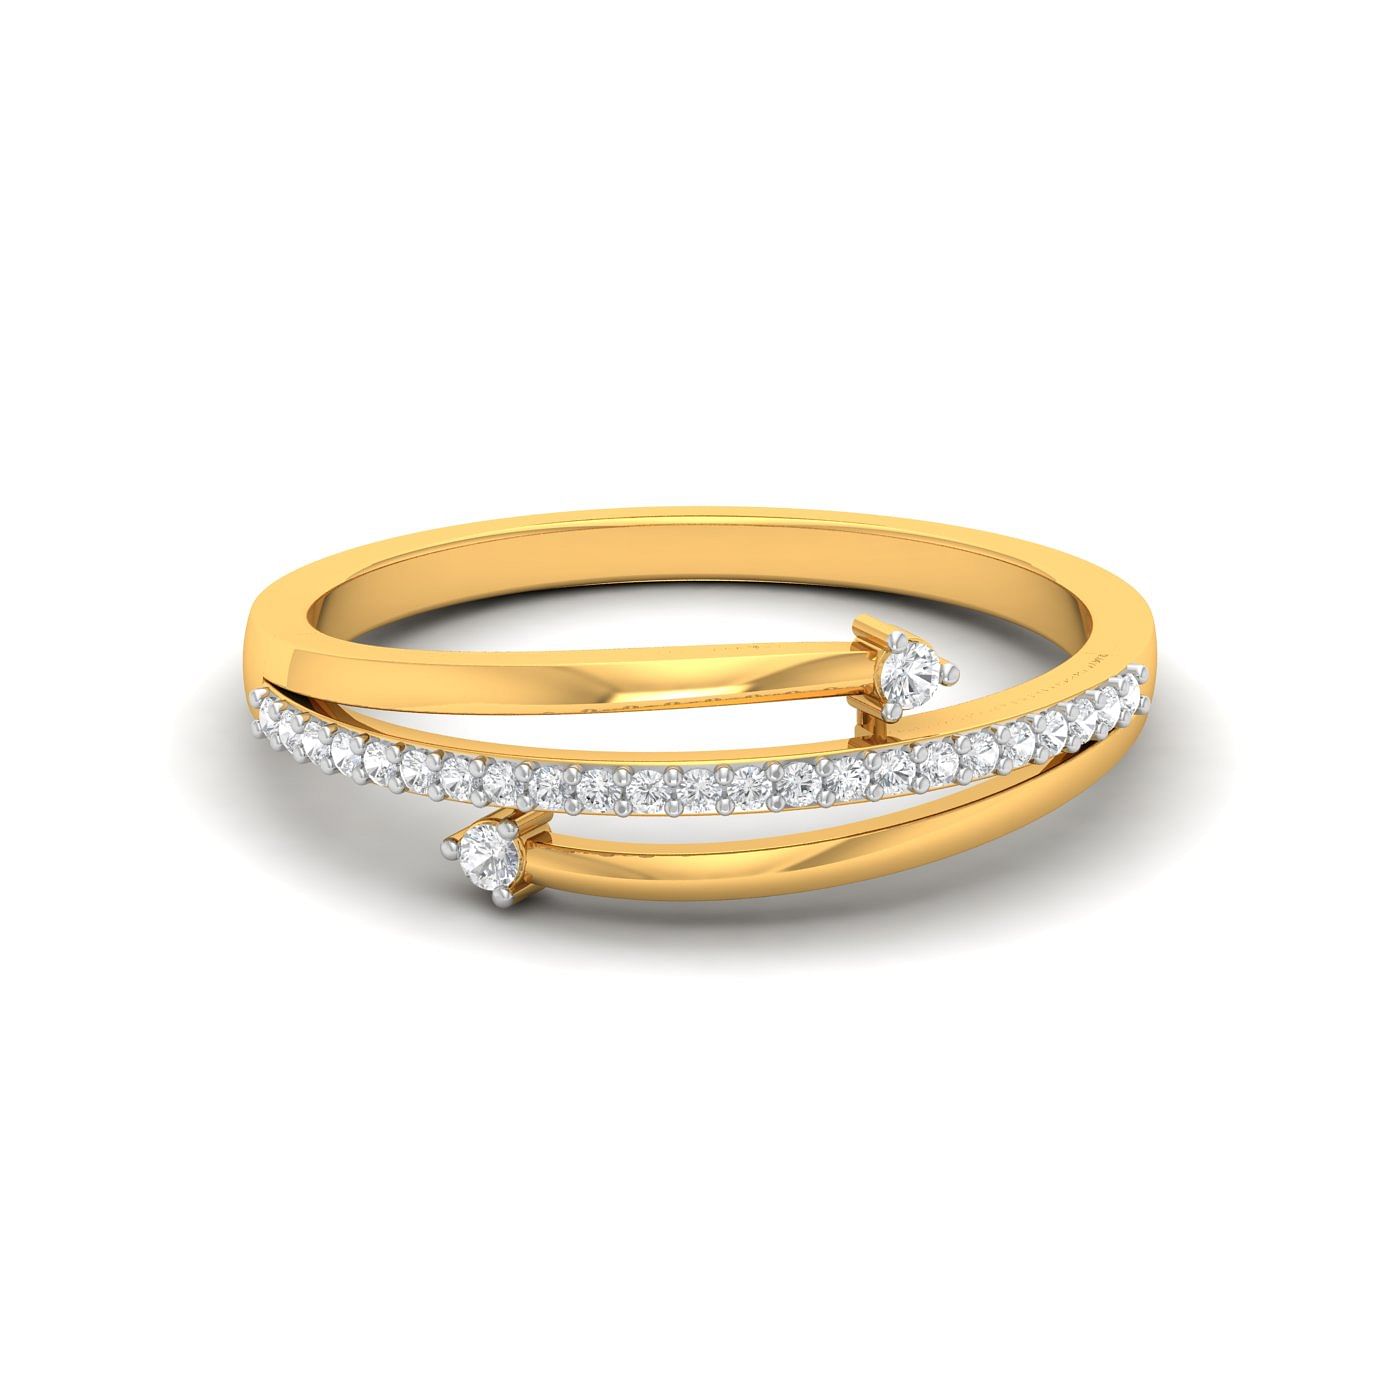 Half Eternity Spring Diamond Ring With Yellow Gold For Gift For Her